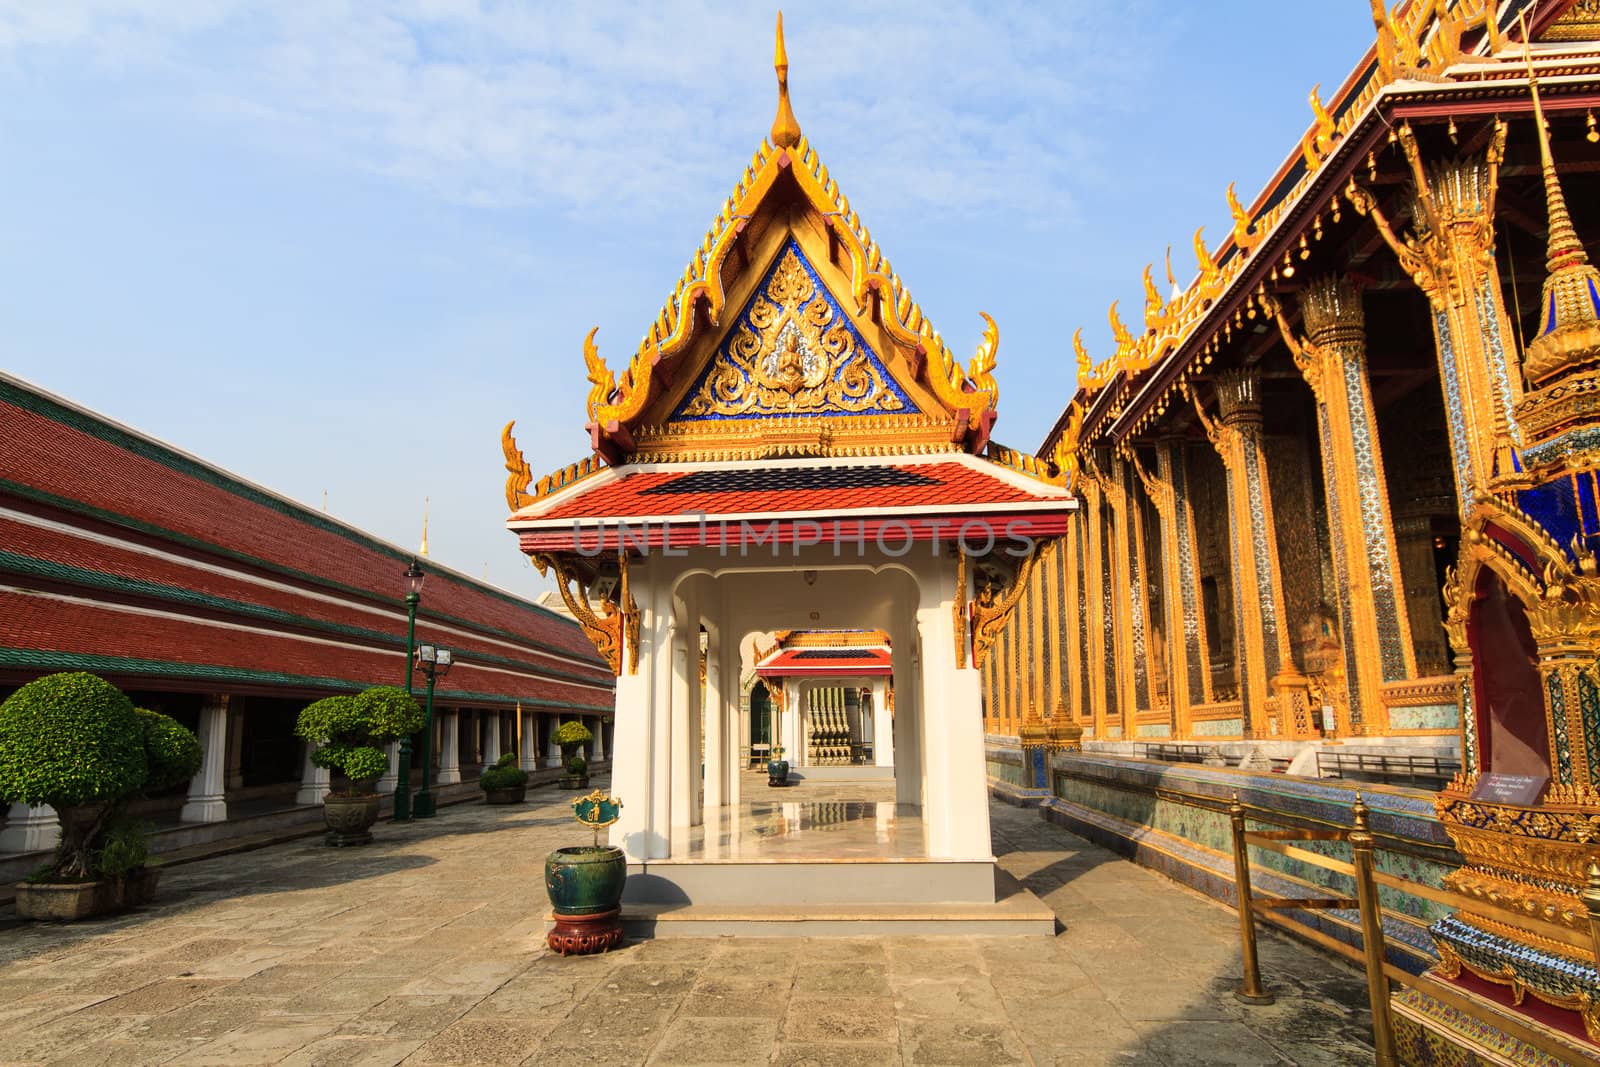 The temple Wat phra kaeo  by thanomphong